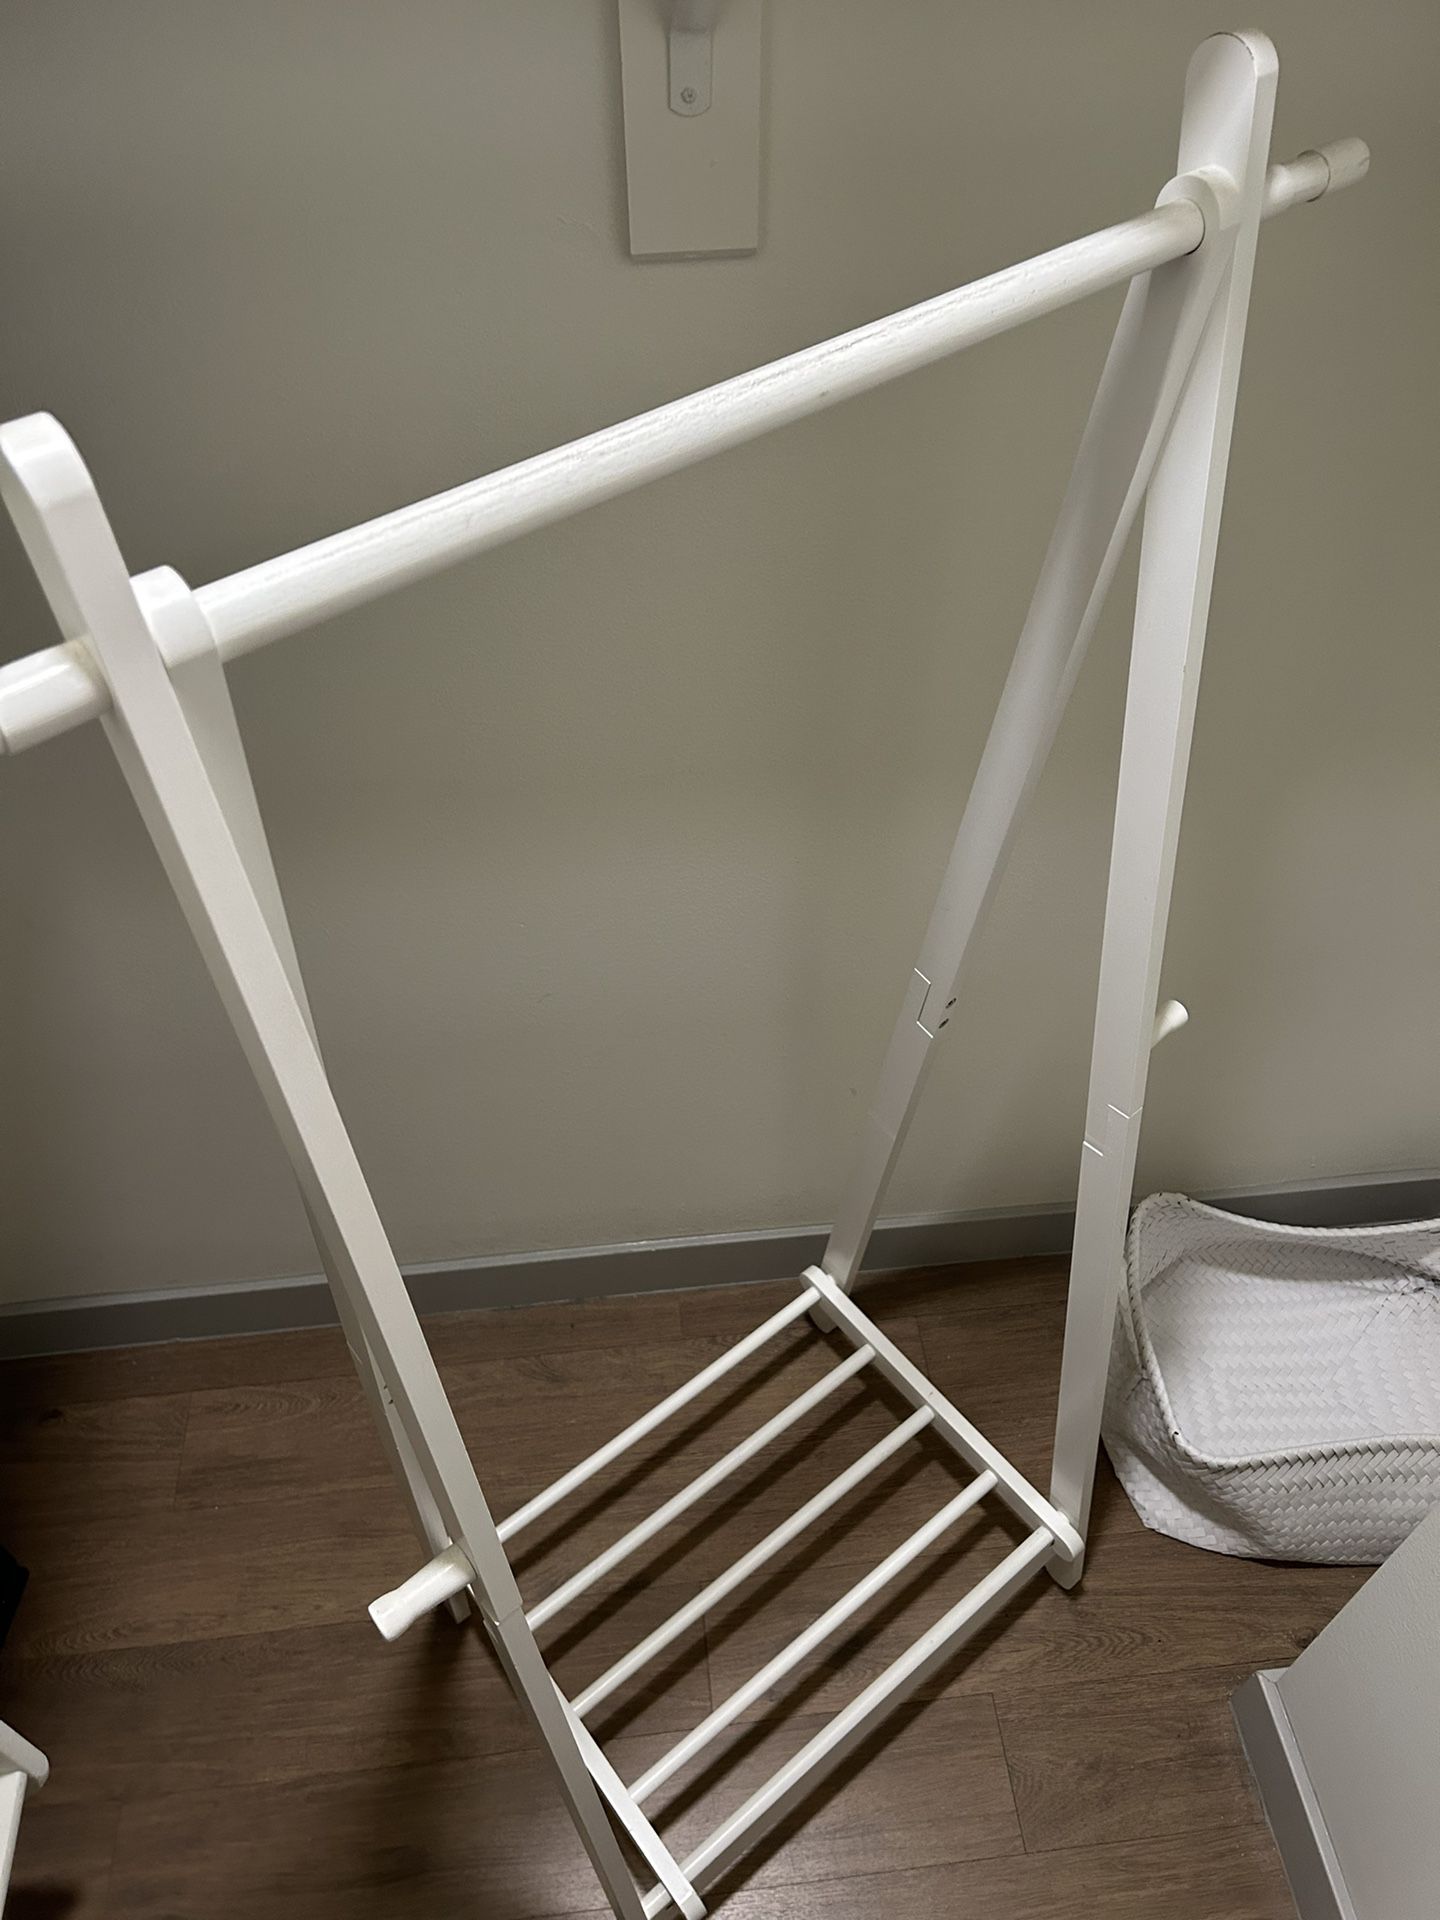 Collapsible Clothes Hanger